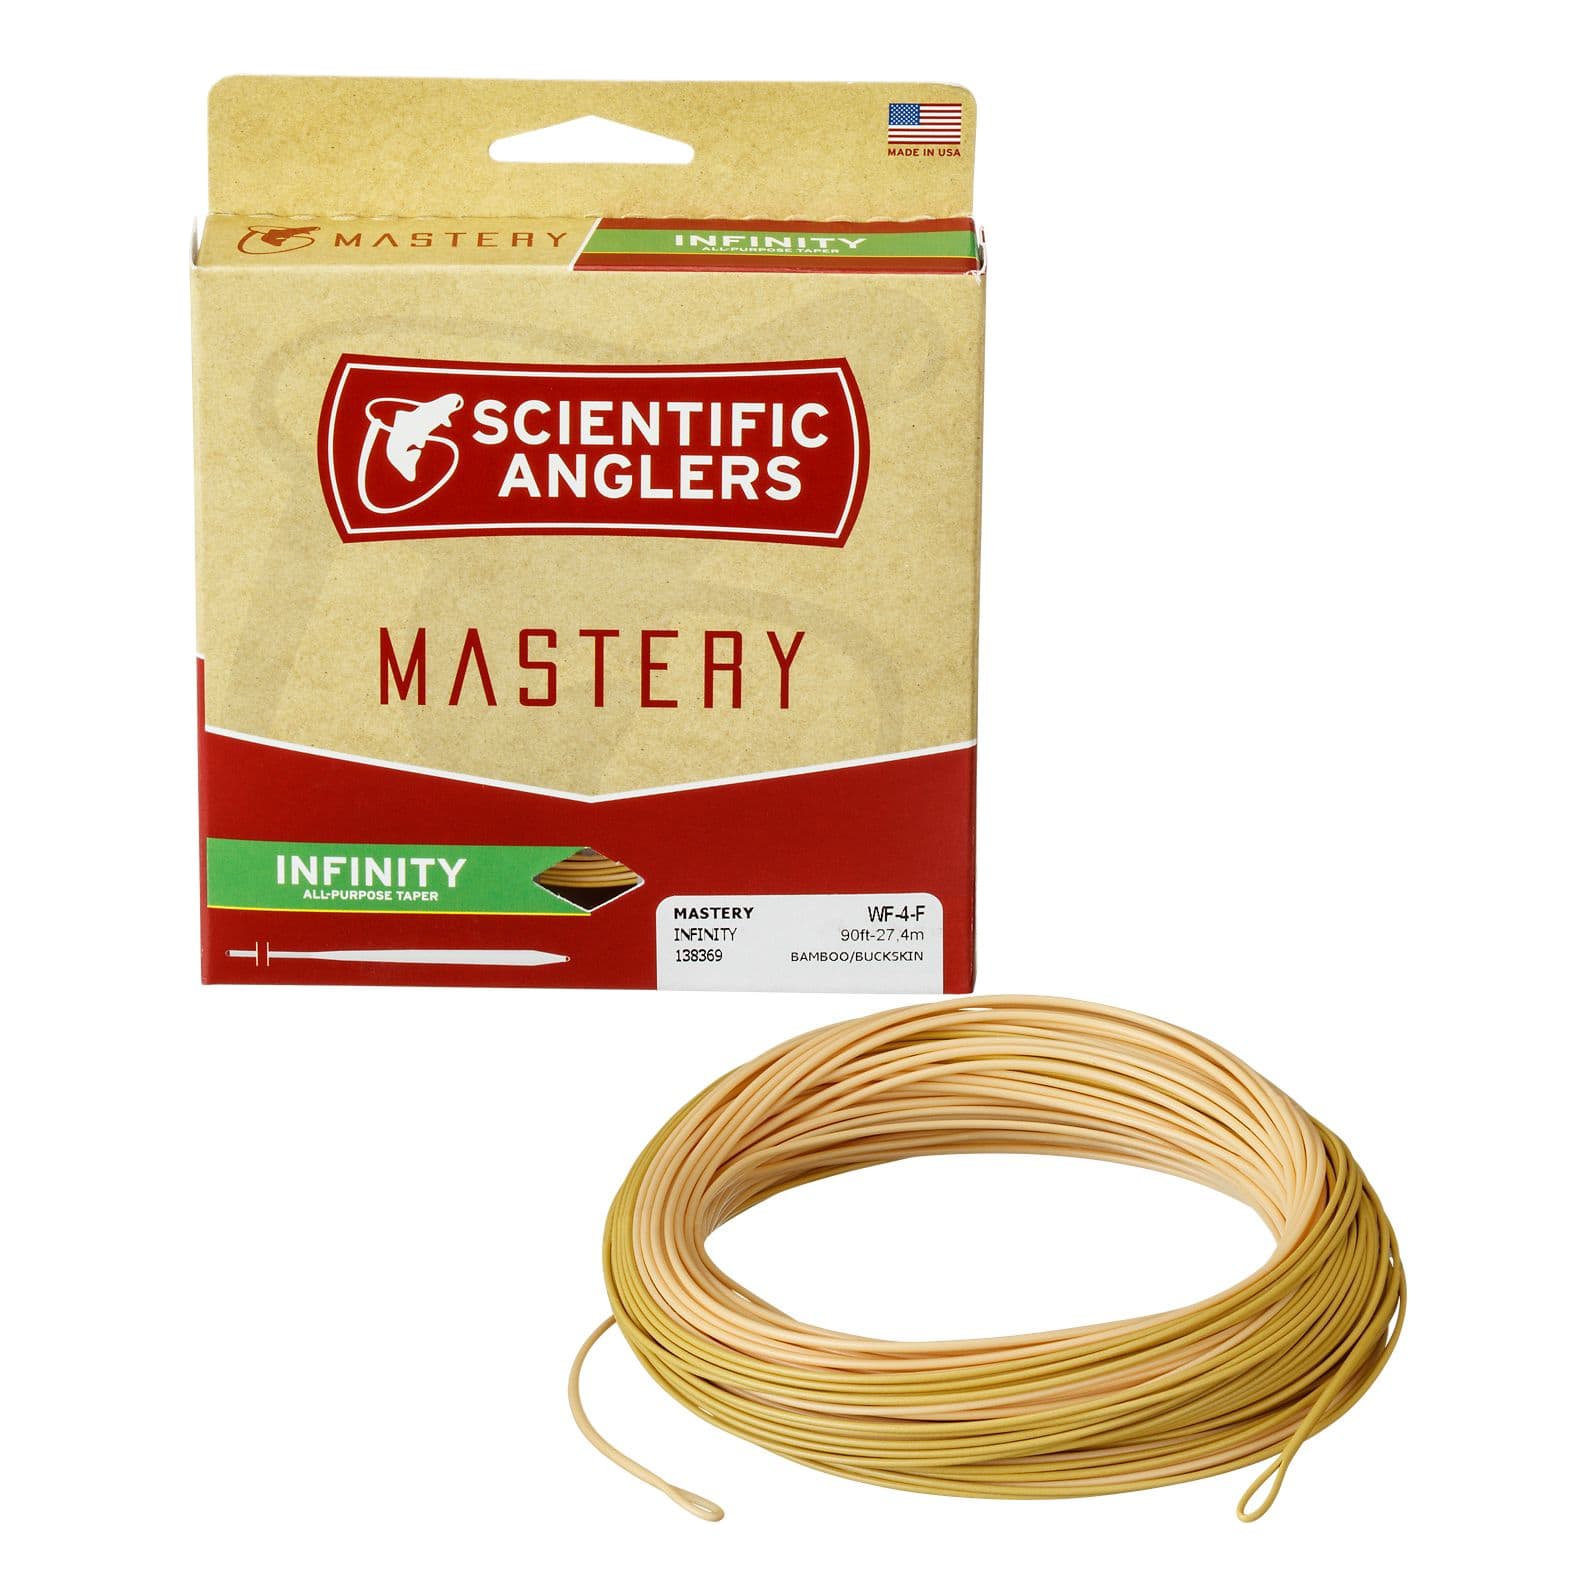 Scientific Anglers® Mastery Infinity Fly Line